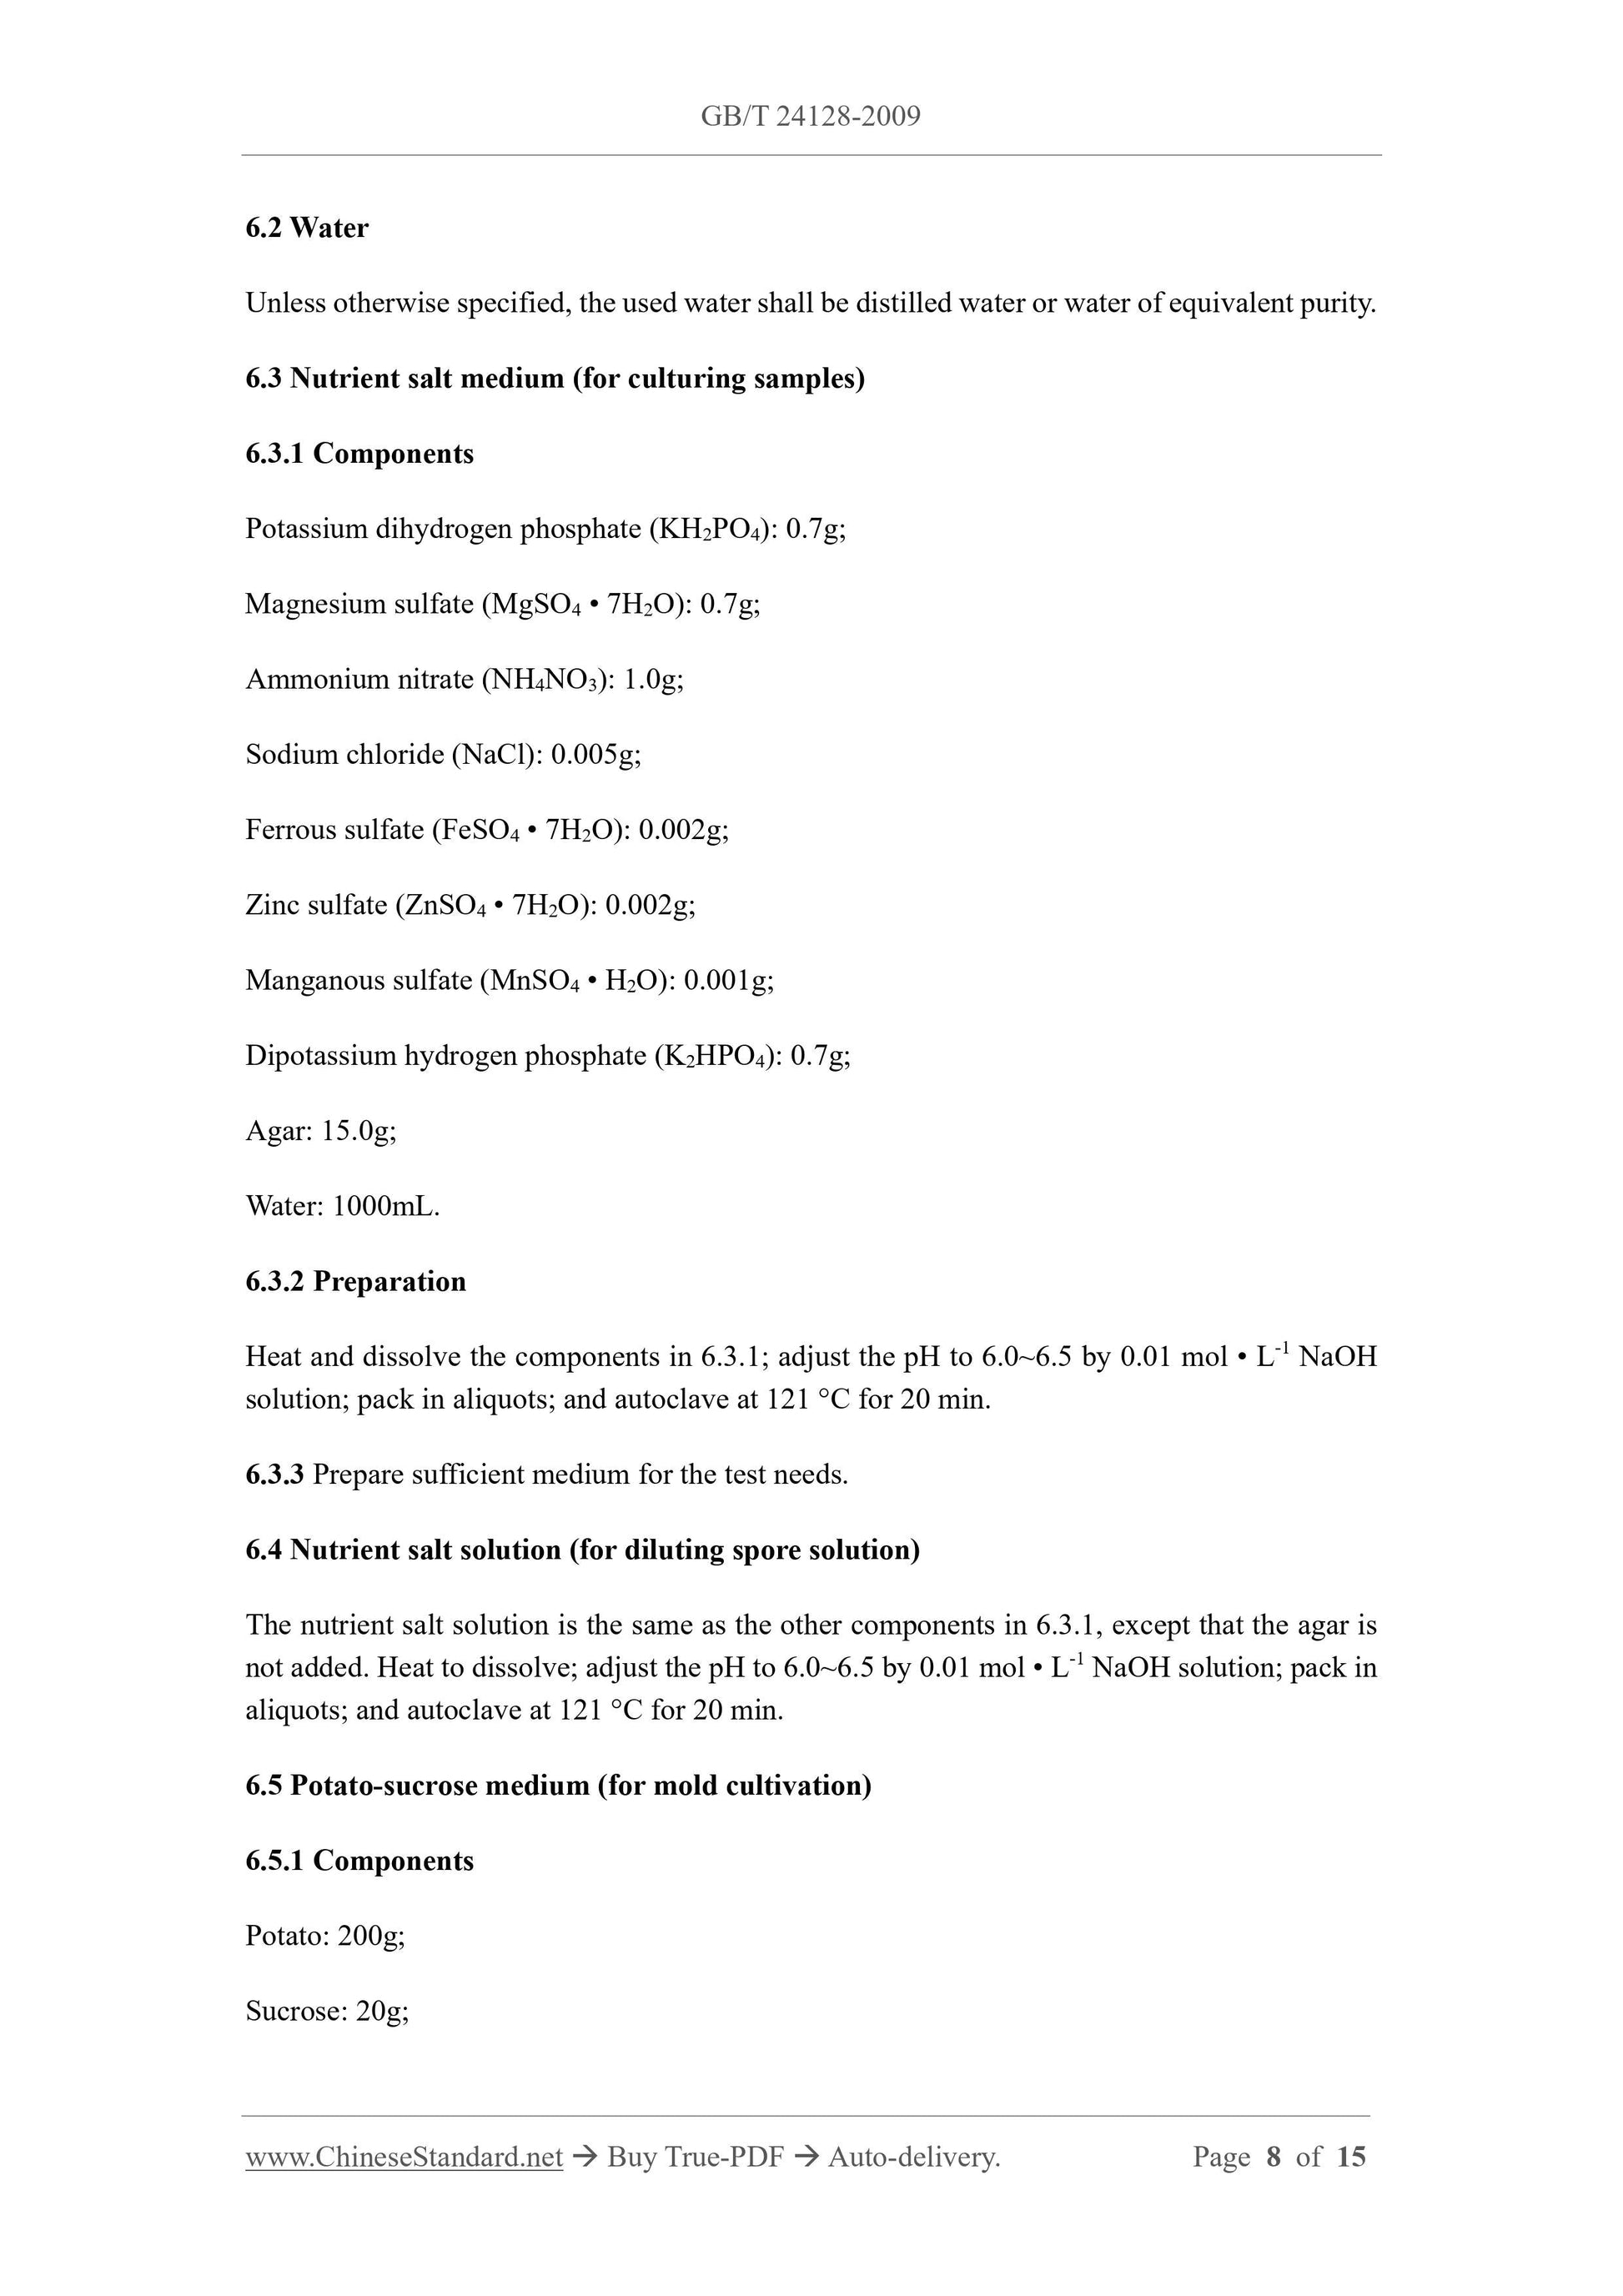 GB/T 24128-2009 Page 5